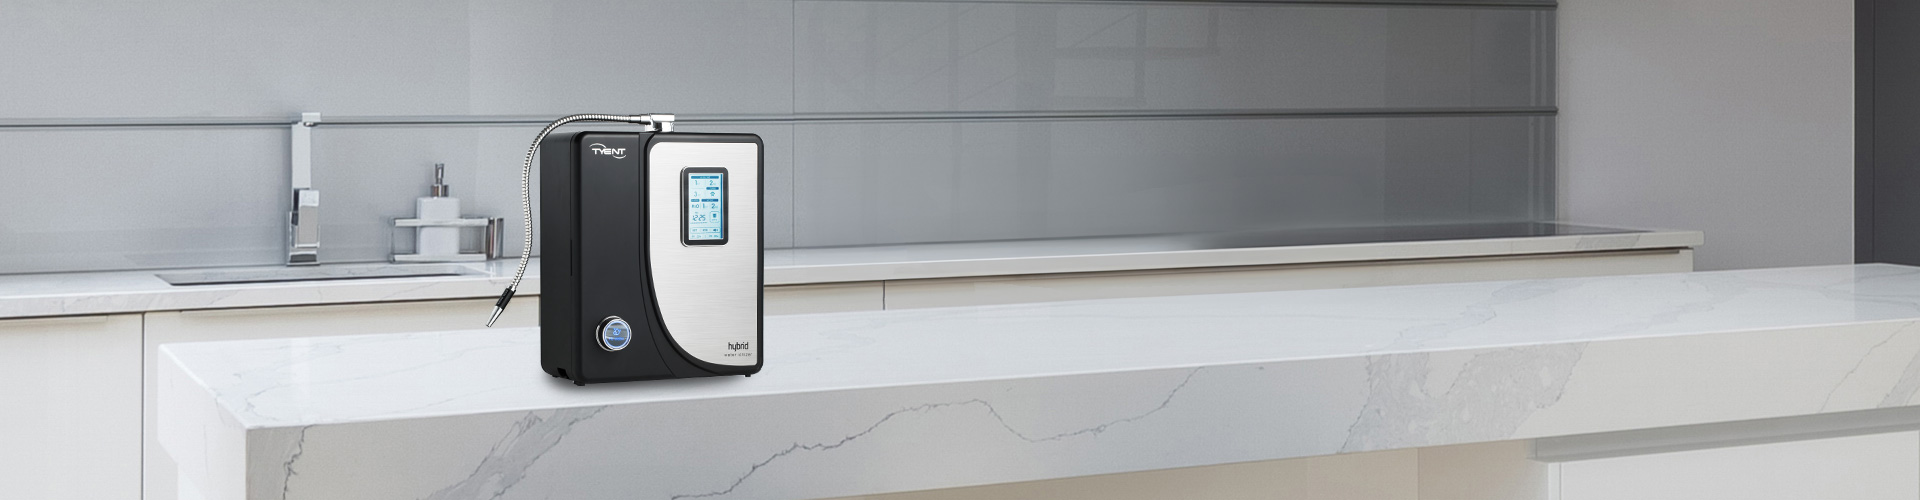 Hybrid Cell Water Ionizer on Kitchen Counter